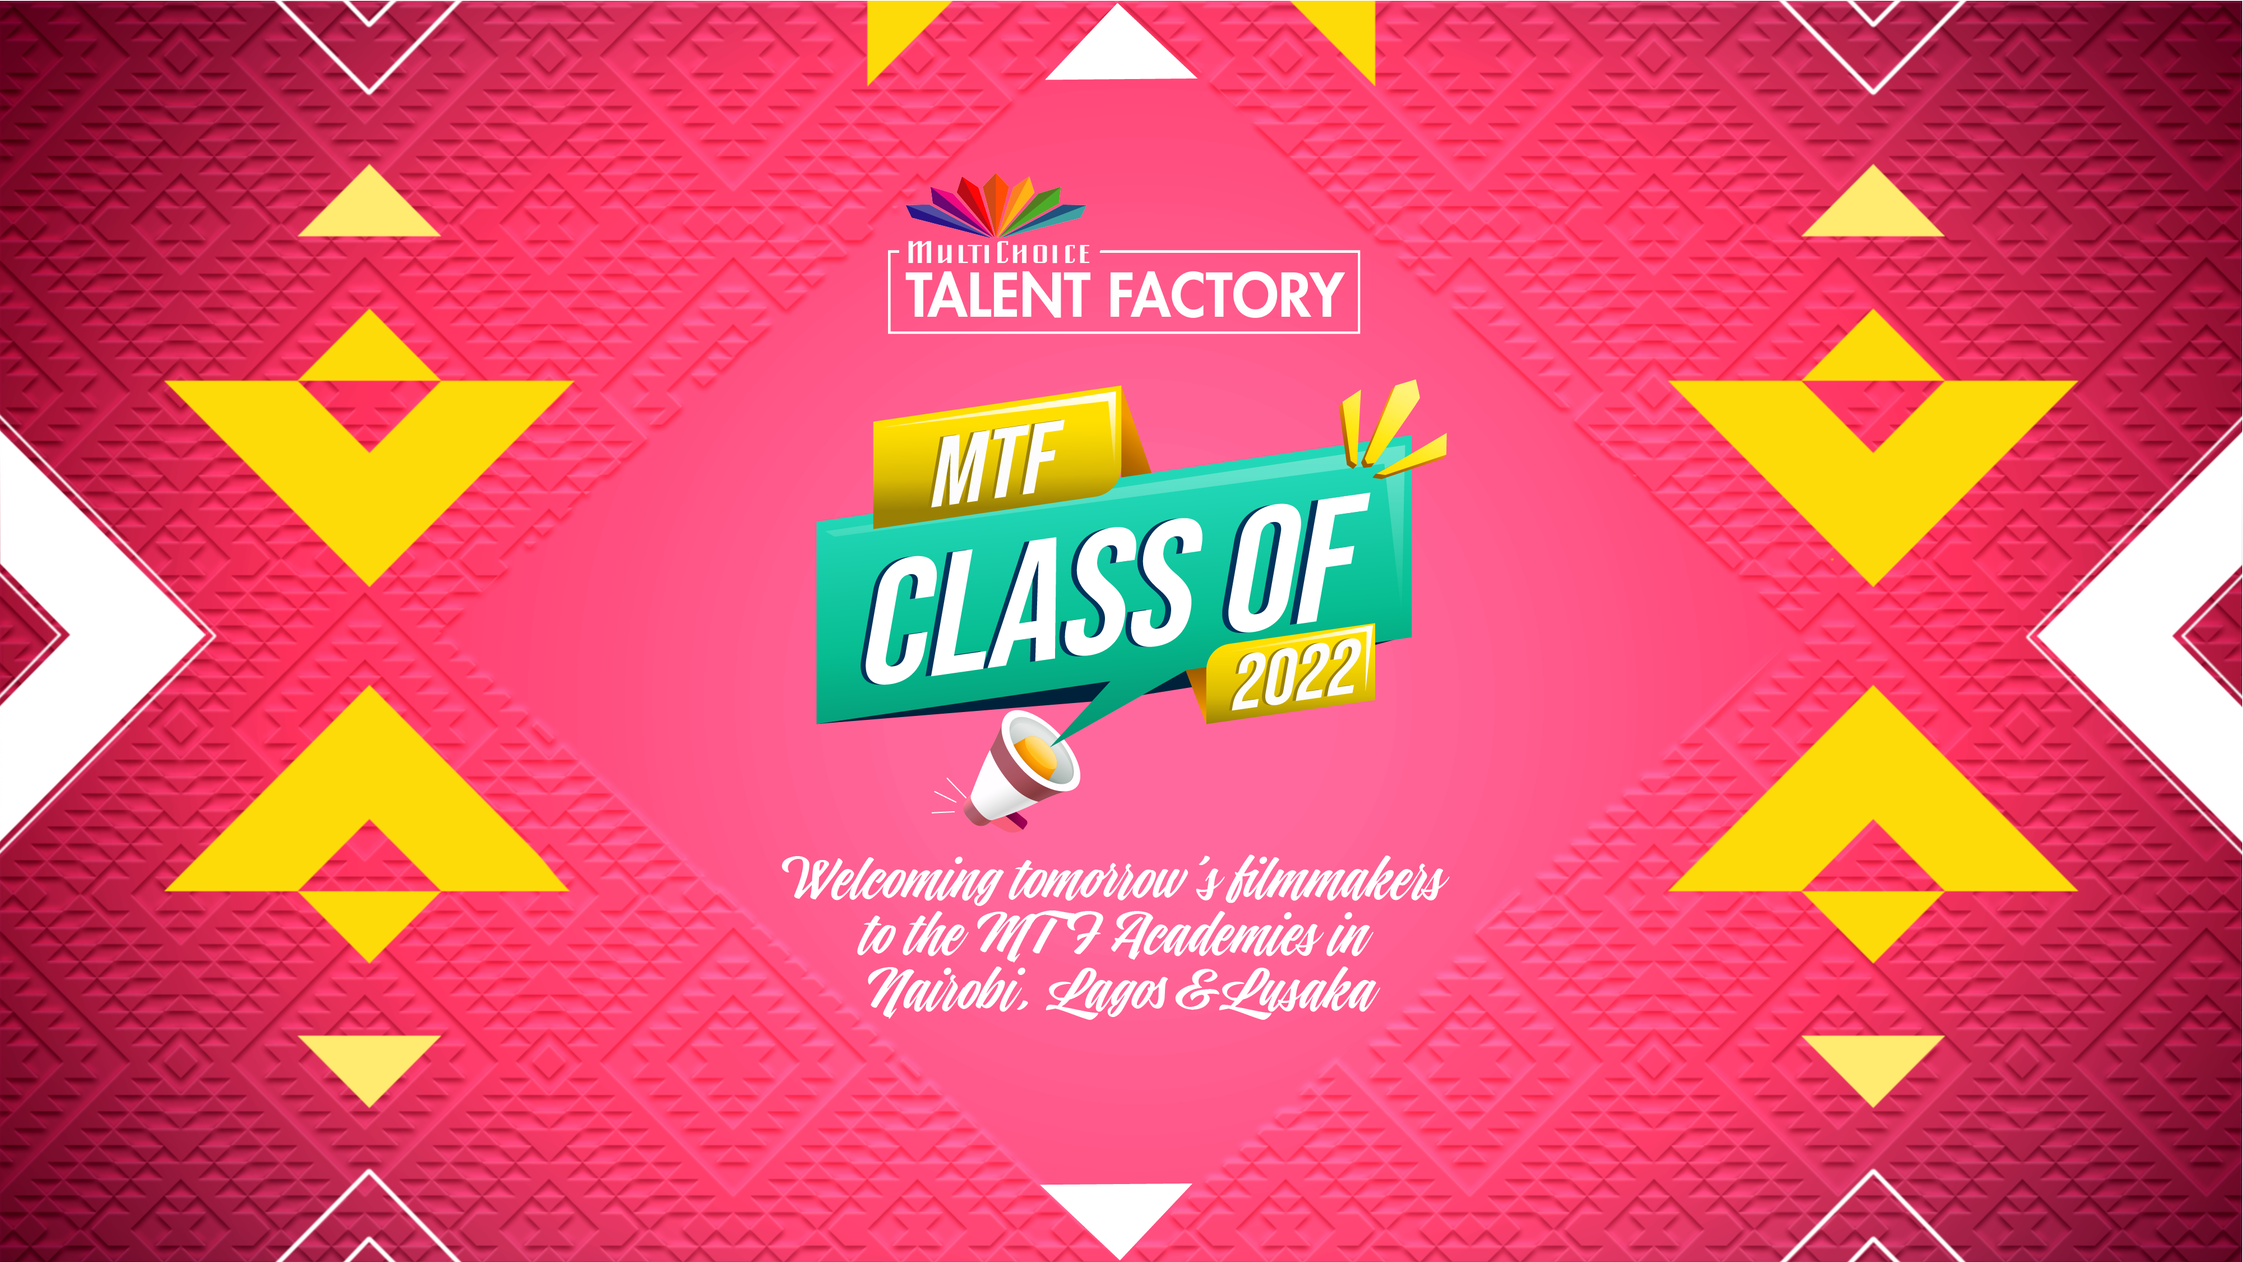 Meet the MultiChoice Talent Factory 60 new students for the 12-month fully-funded academic programme